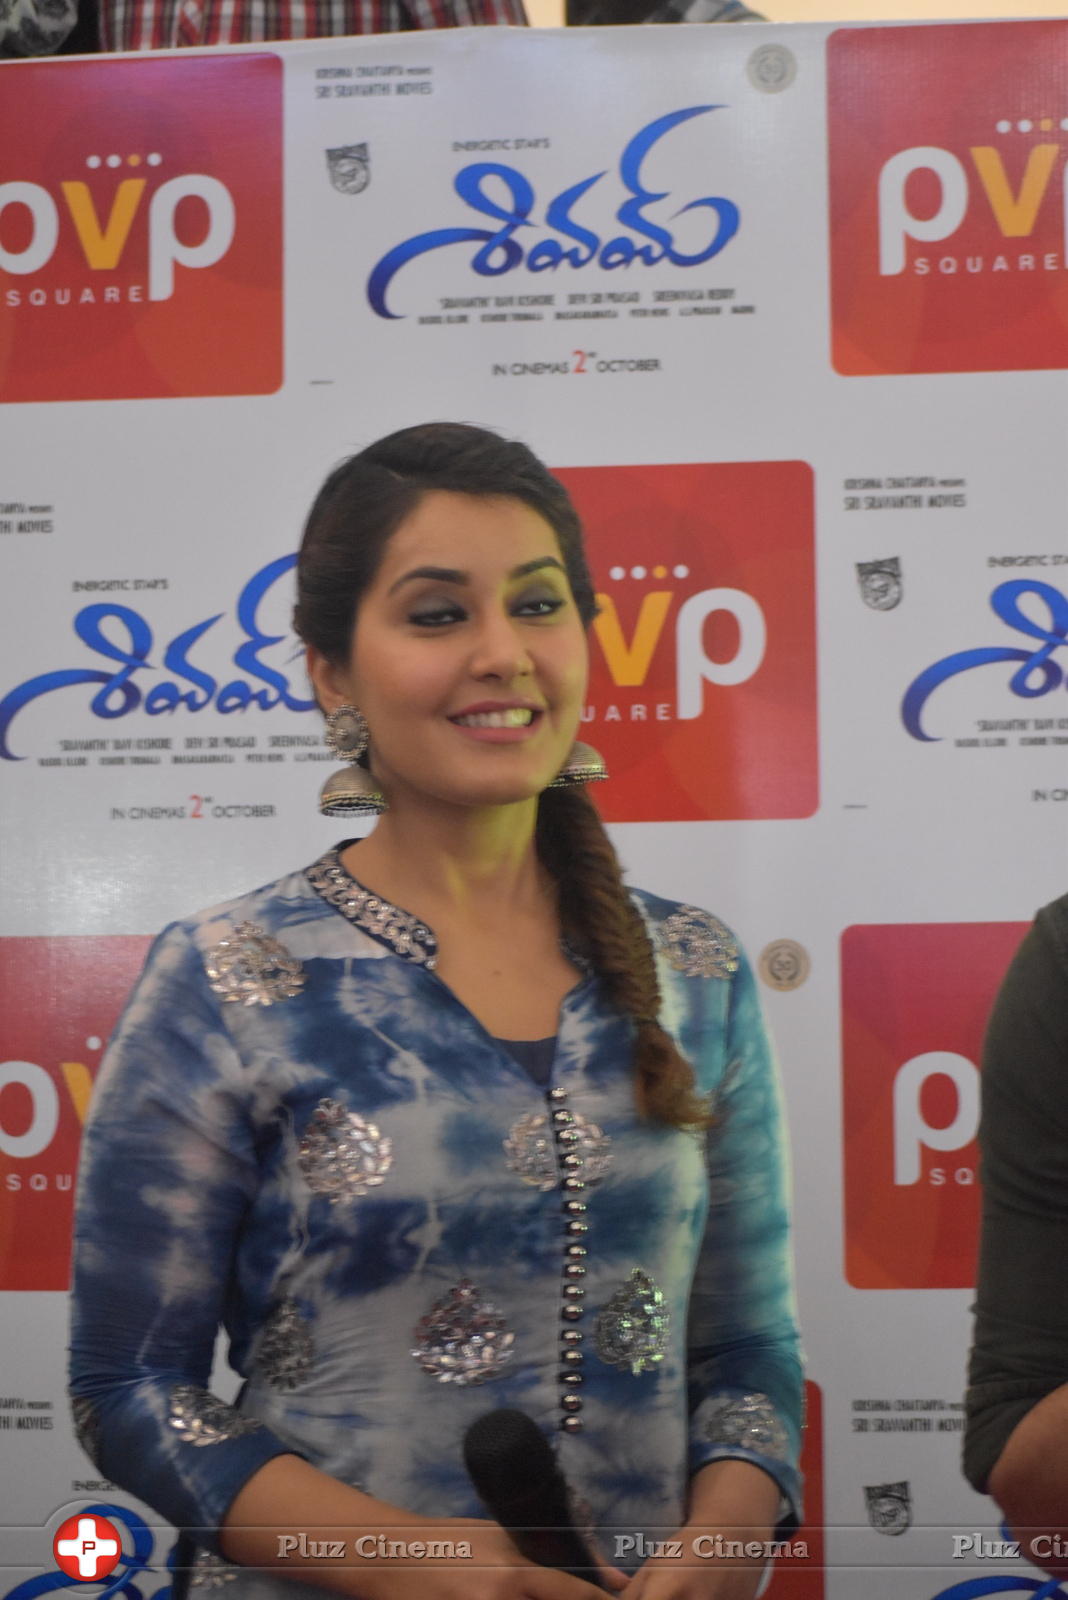 Raashi Khanna - Shivam Movie Promotion at PVP Square Mall Photos | Picture 1125201